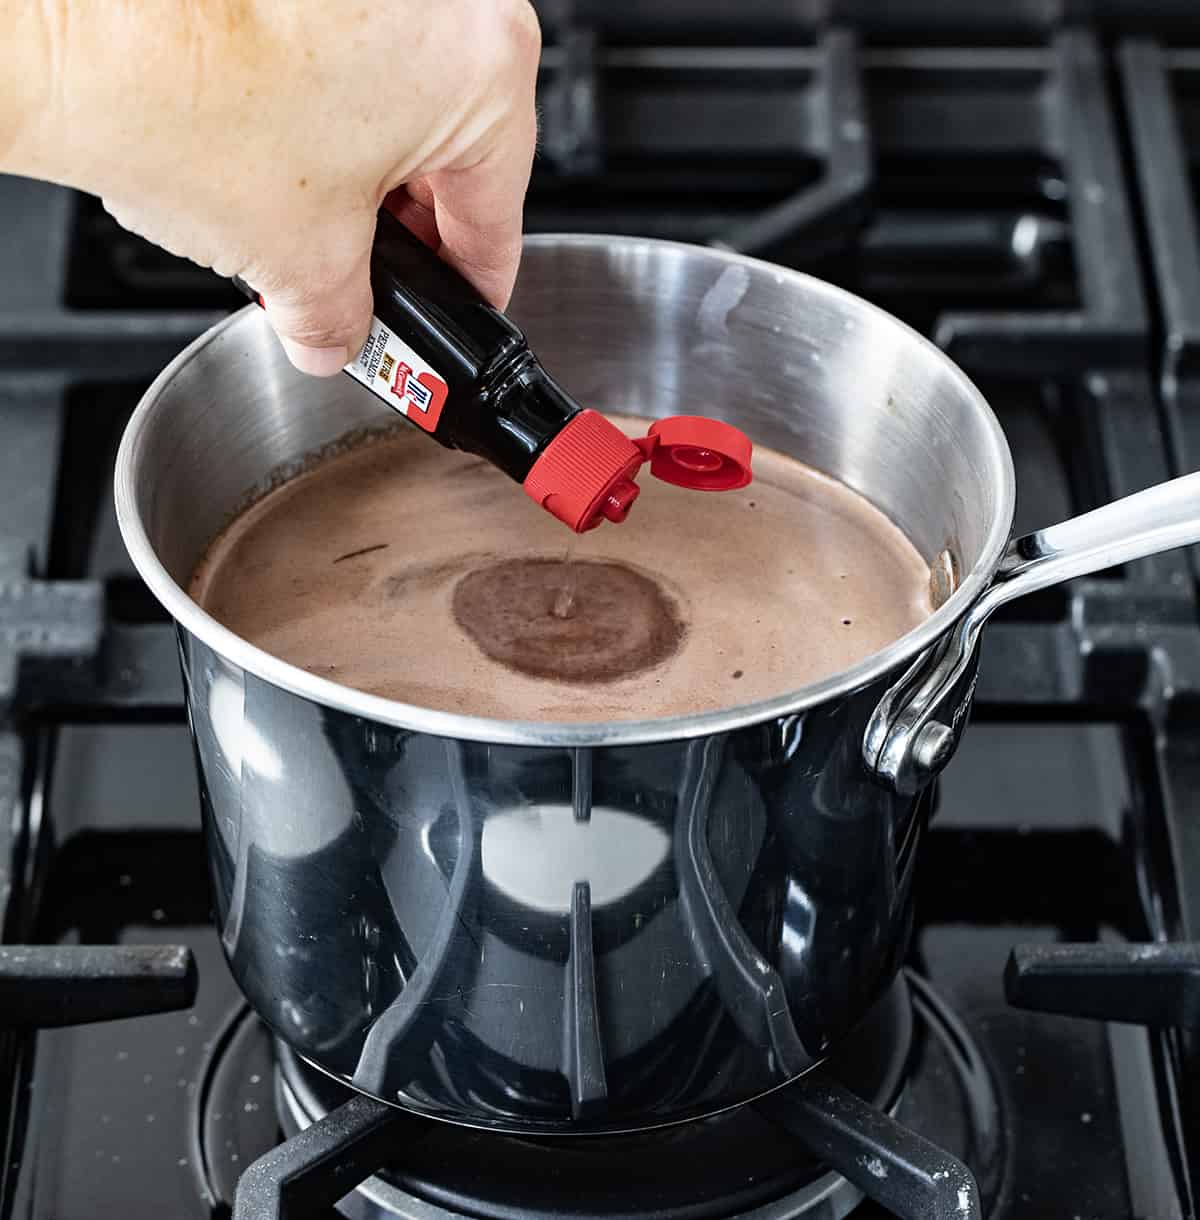 Adding Peppermint Extract to Melted Chocolate in a Saucepan.